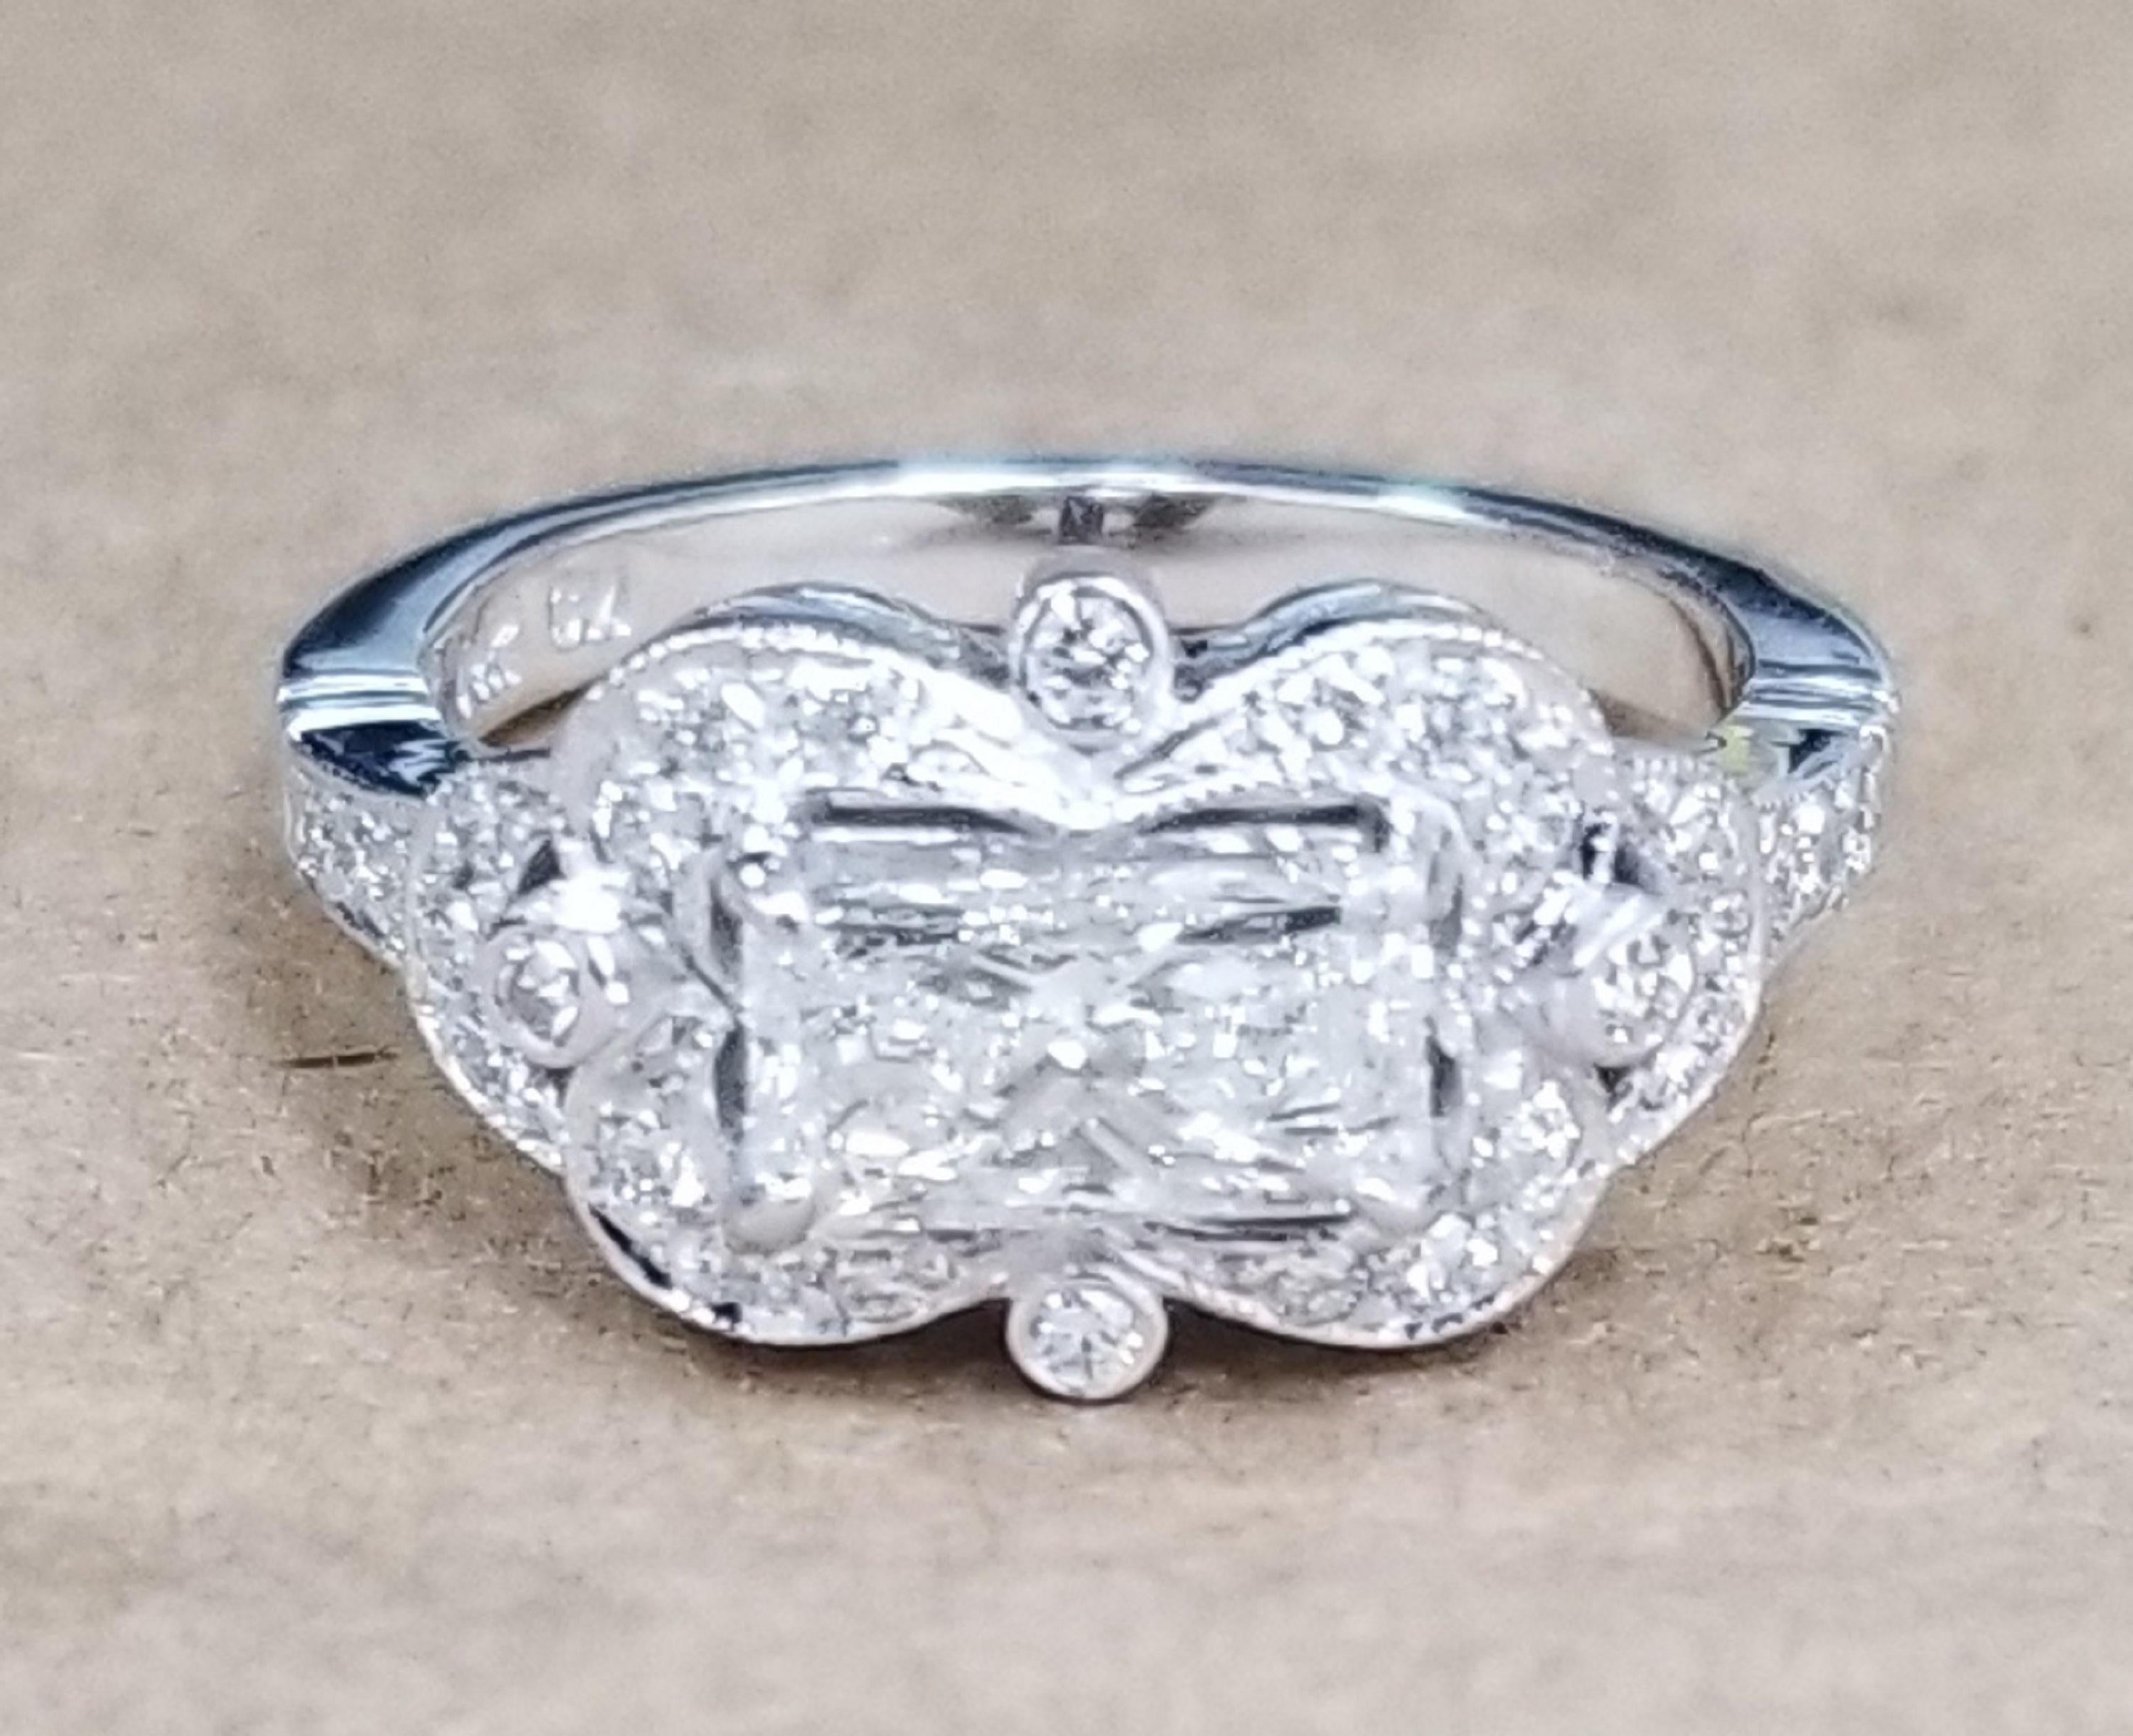 A beautiful 14k white gold setting containing 28 full cut diamonds; color G, clarity VS1 and weight .30pts.  This ring is a size 6 but we will size to fit for free.